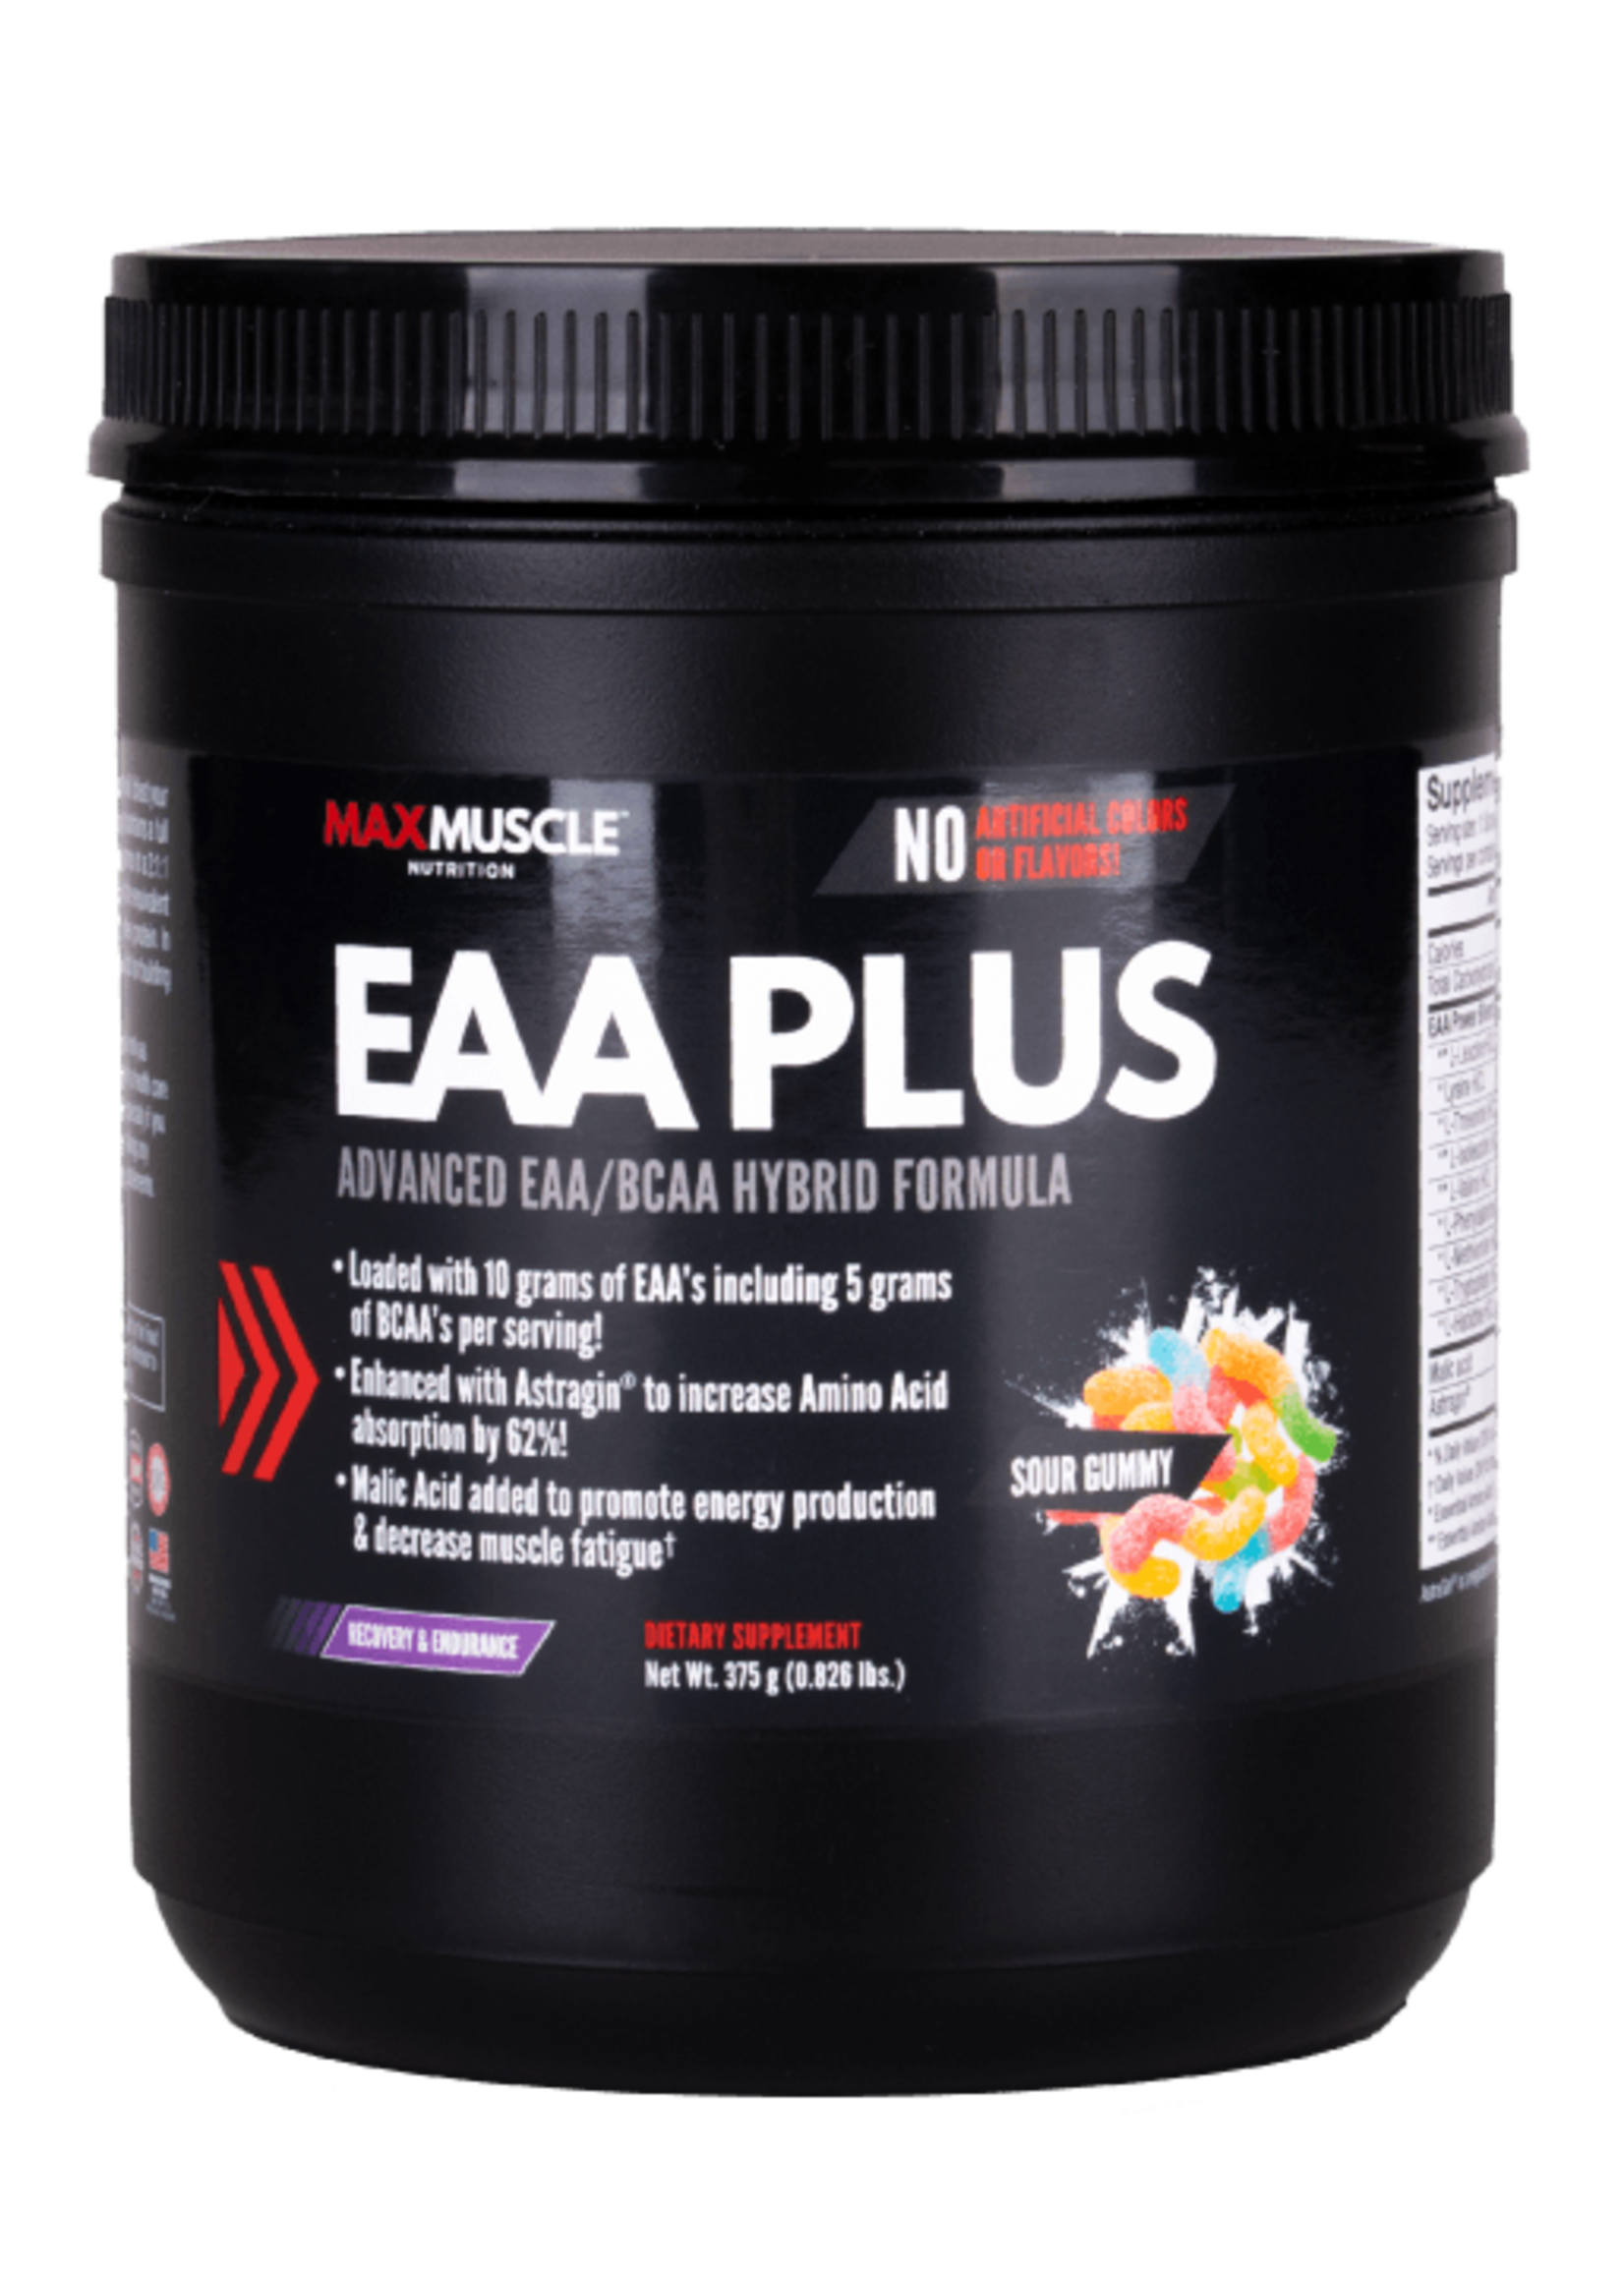 Max Muscle EAA Plus Sour Gummy